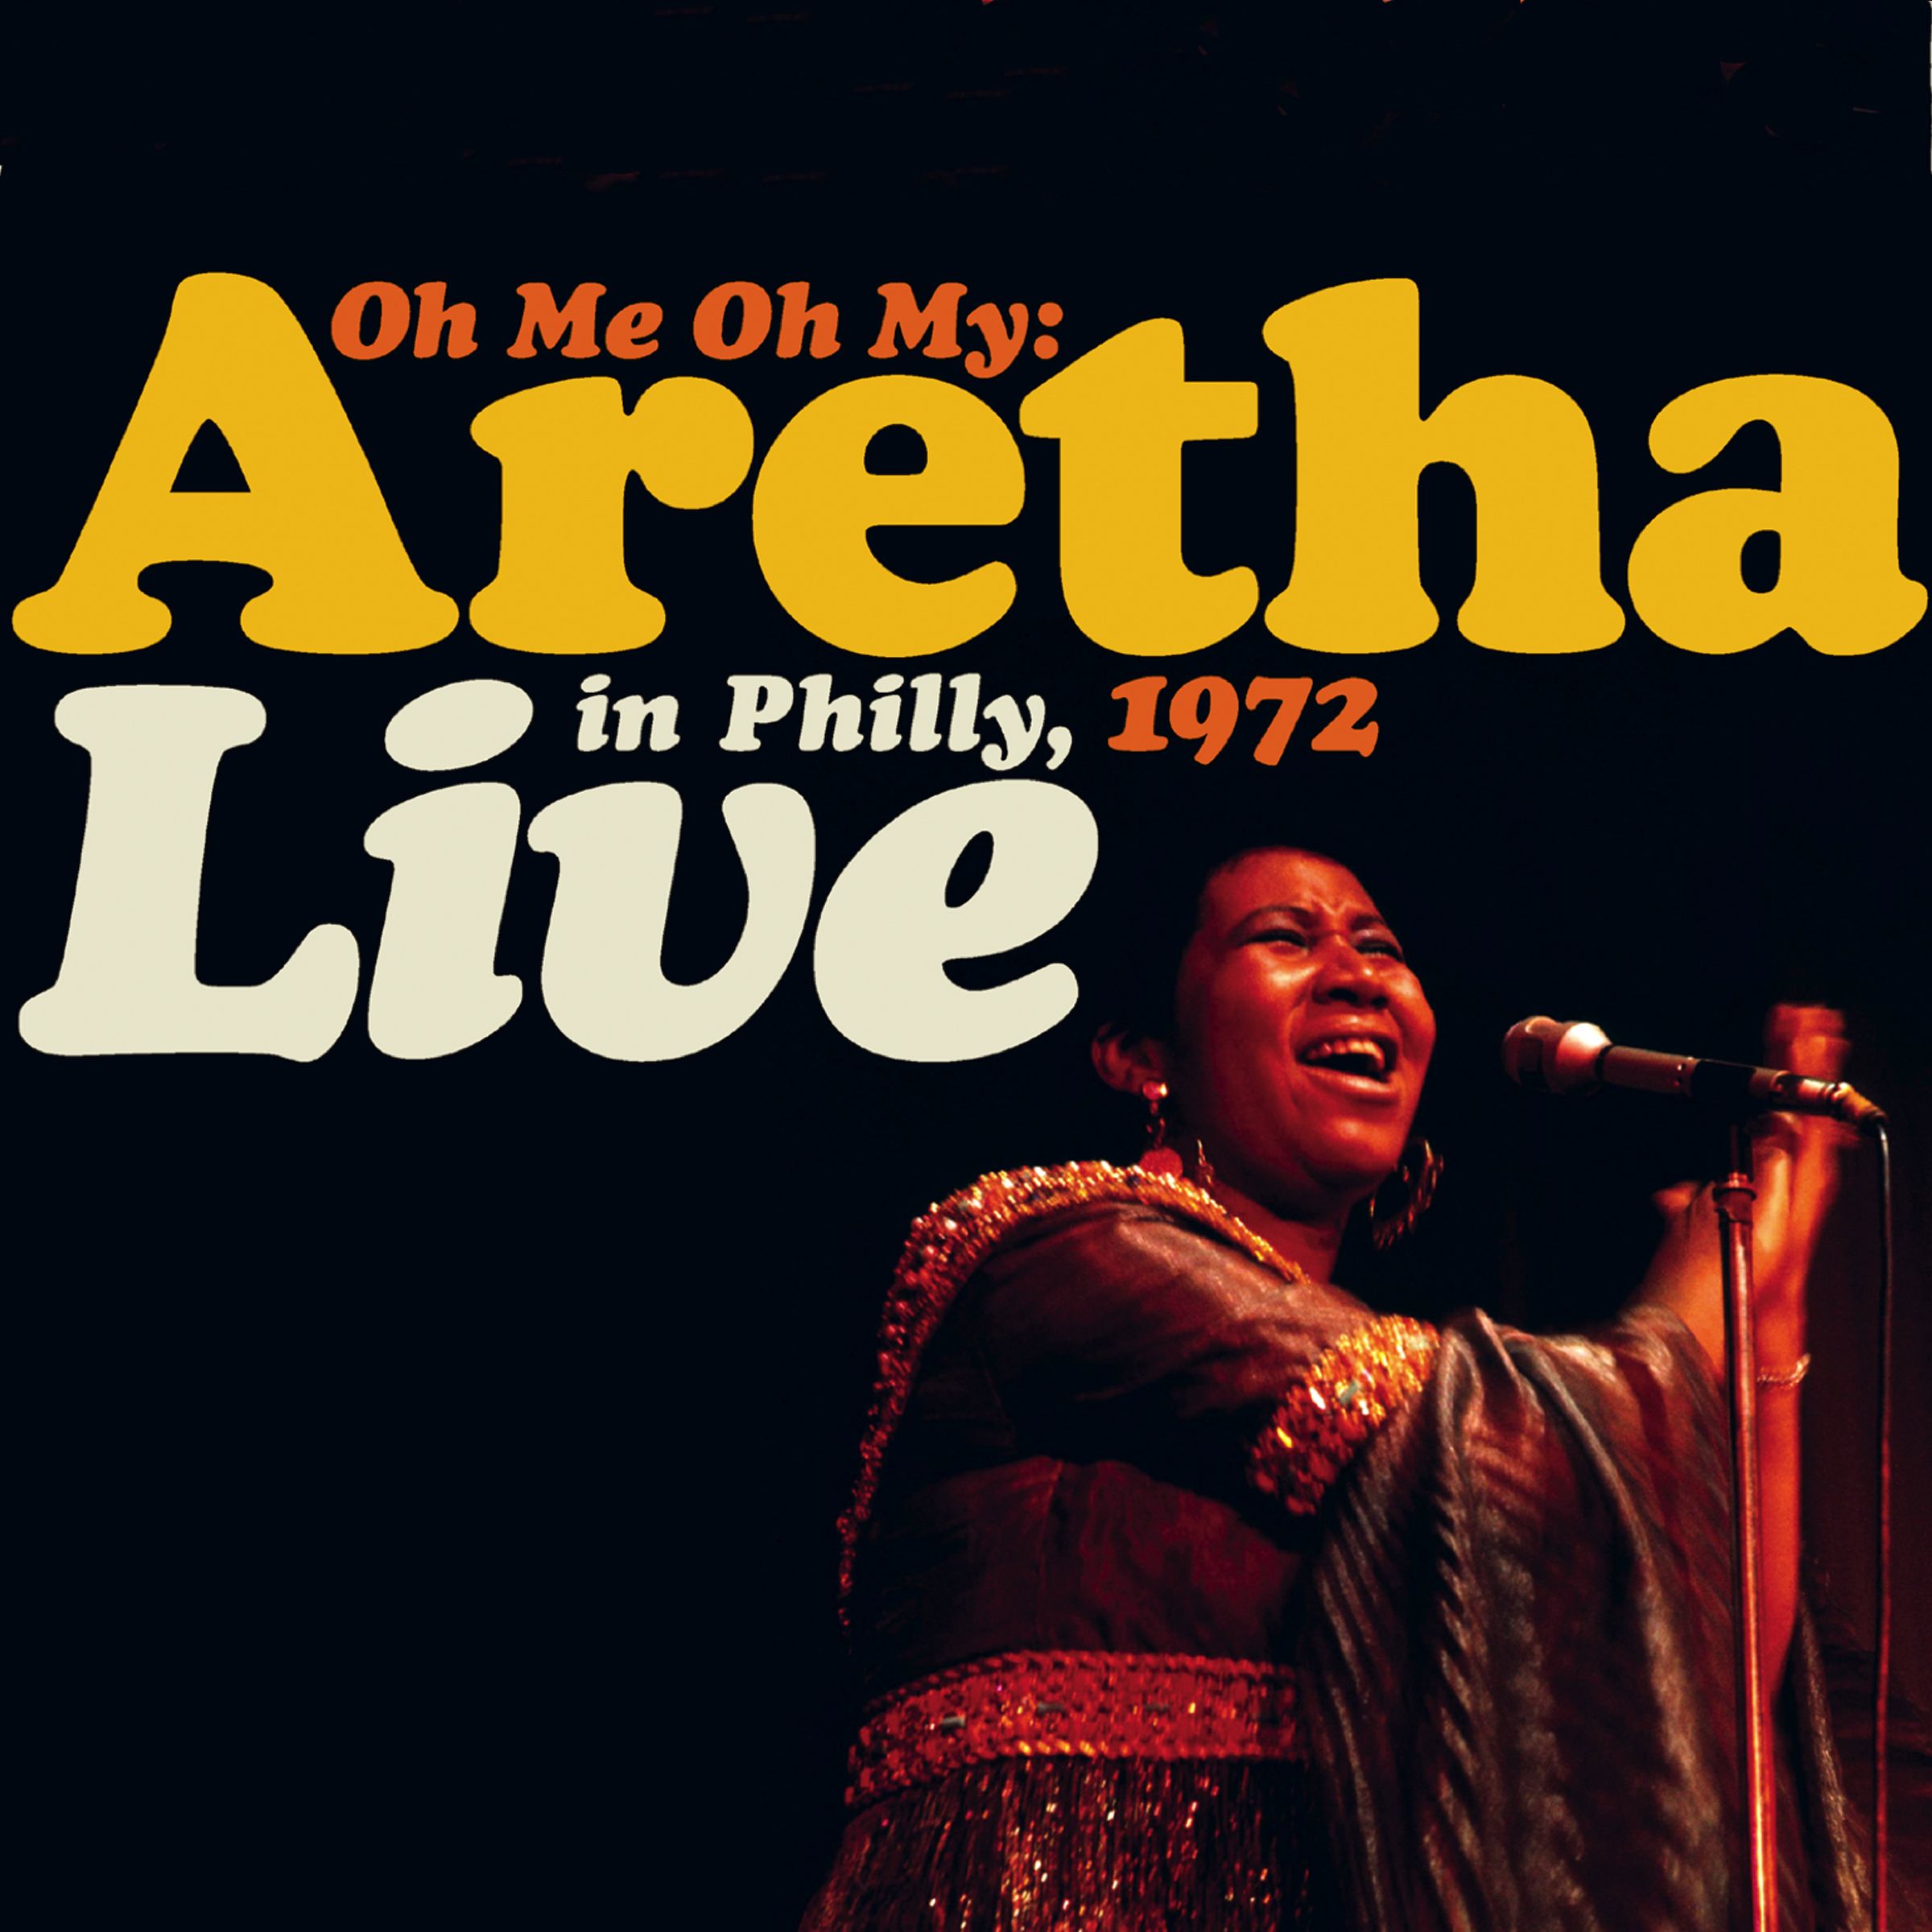 This Girl's In Love With You (1972 Live in Philly) (Remastered)